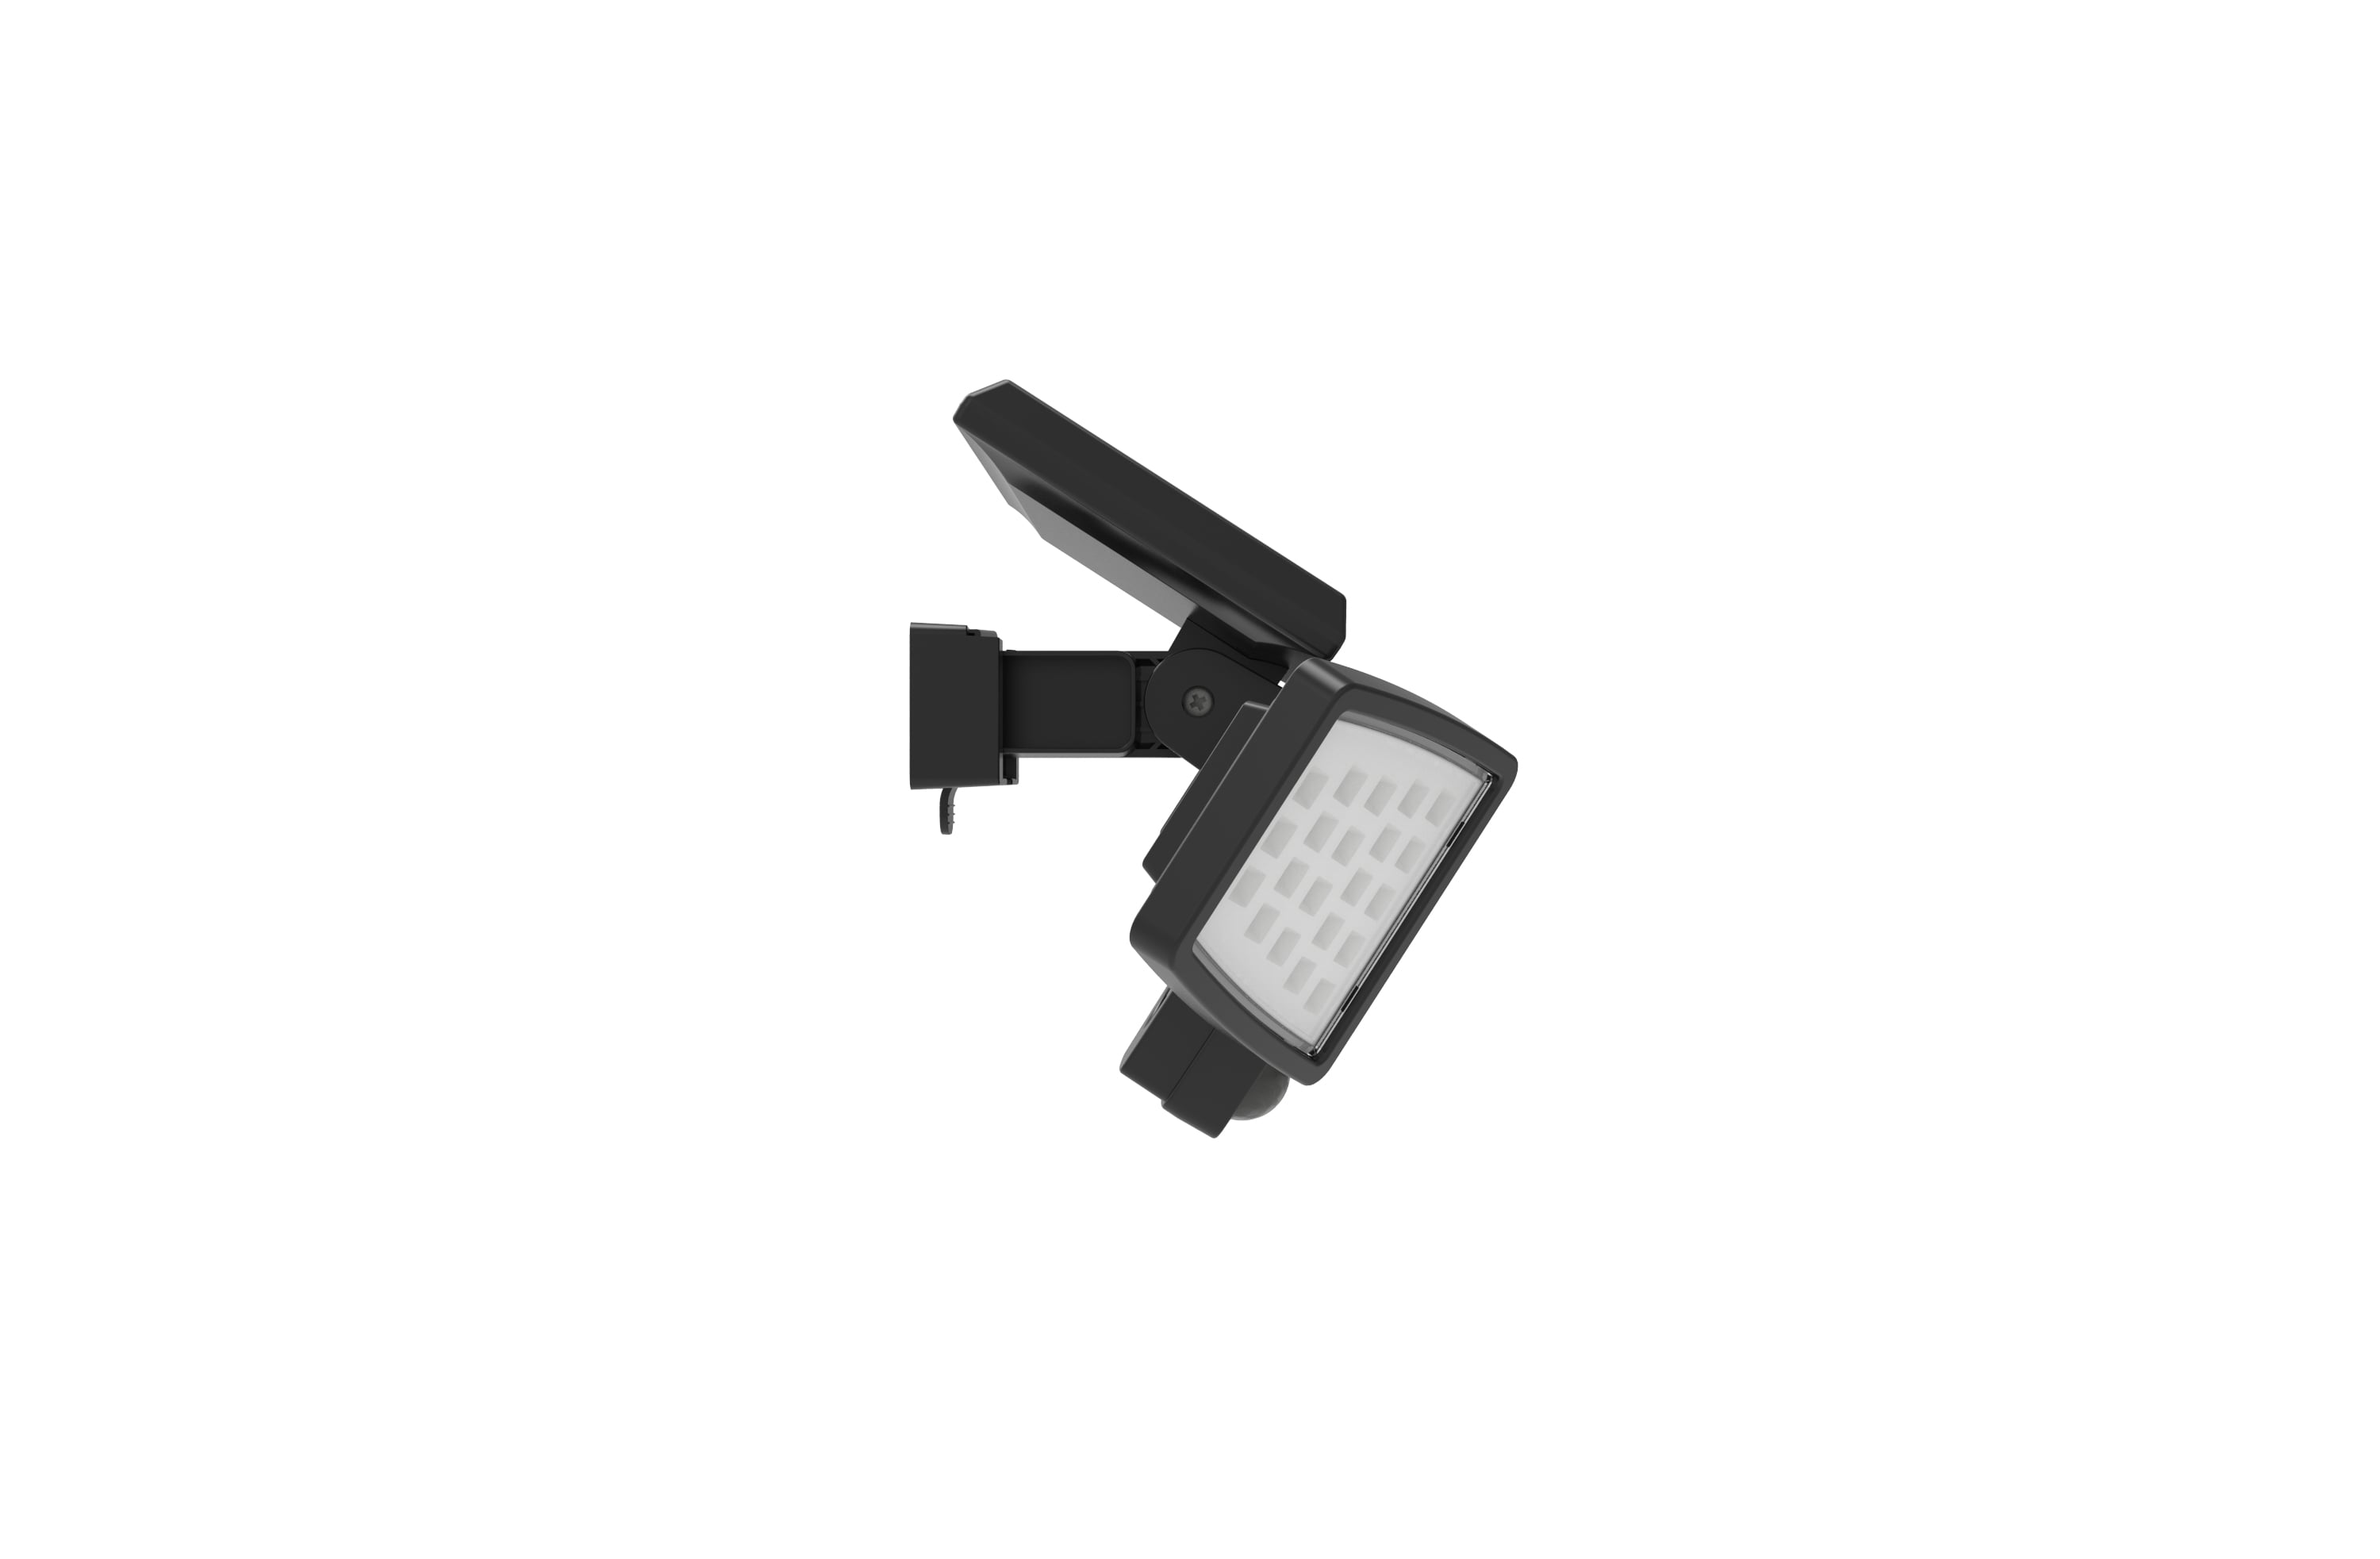 Pinegreen Lighting 120-Degree Black Equivalent the at in Flood Lights 120-Wattage 3-Head department Motion-Sensor Flood Solar Motion-Activated Light LED